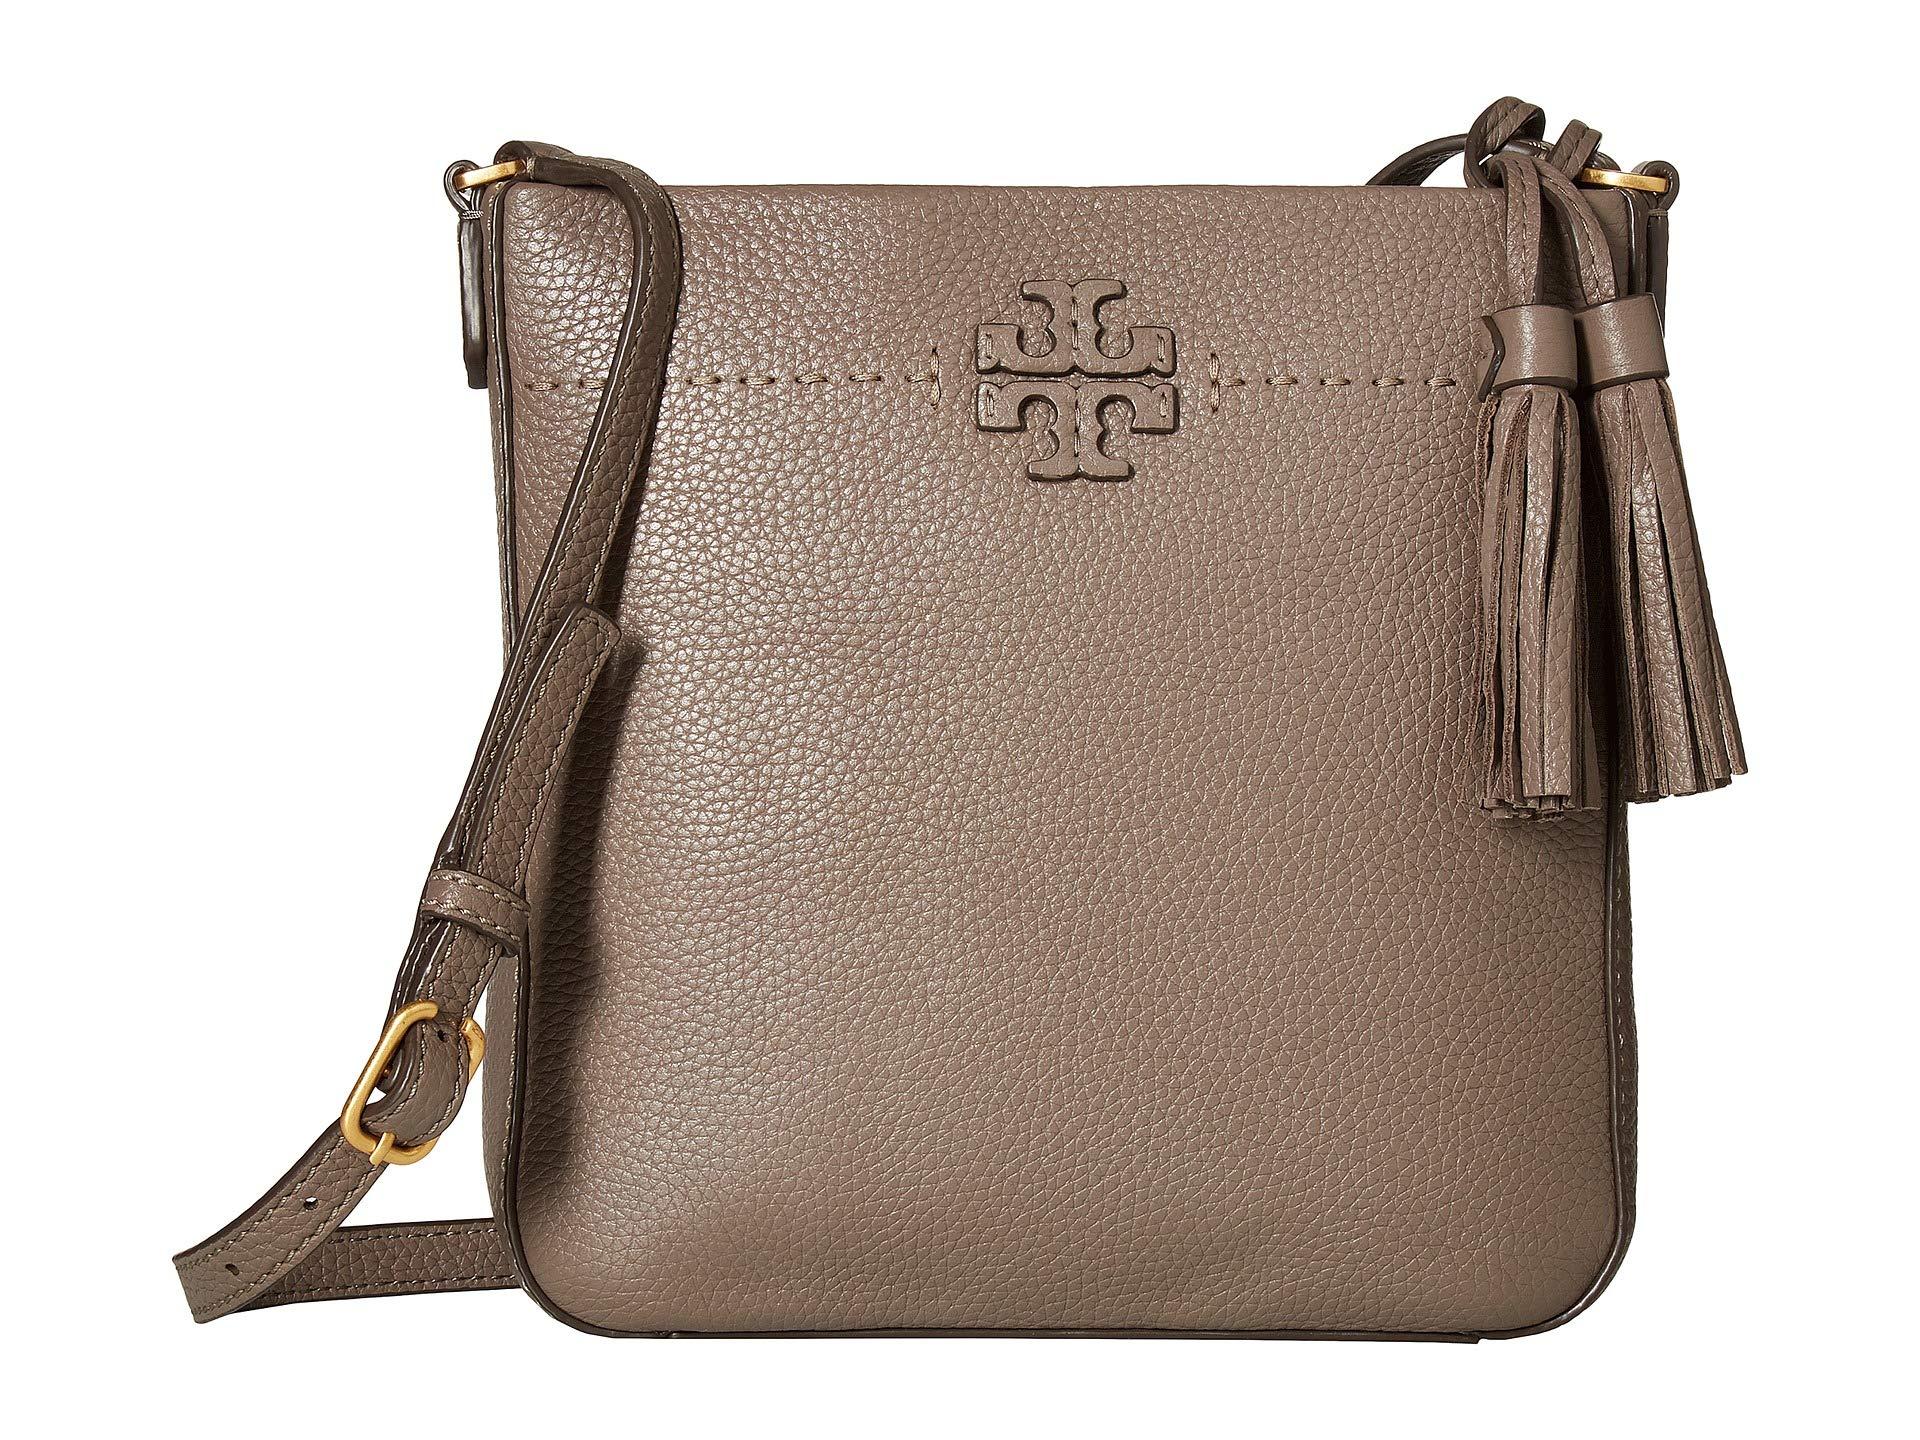 Tory Burch Leather Mcgraw Swingpack in Beige (Natural) - Lyst